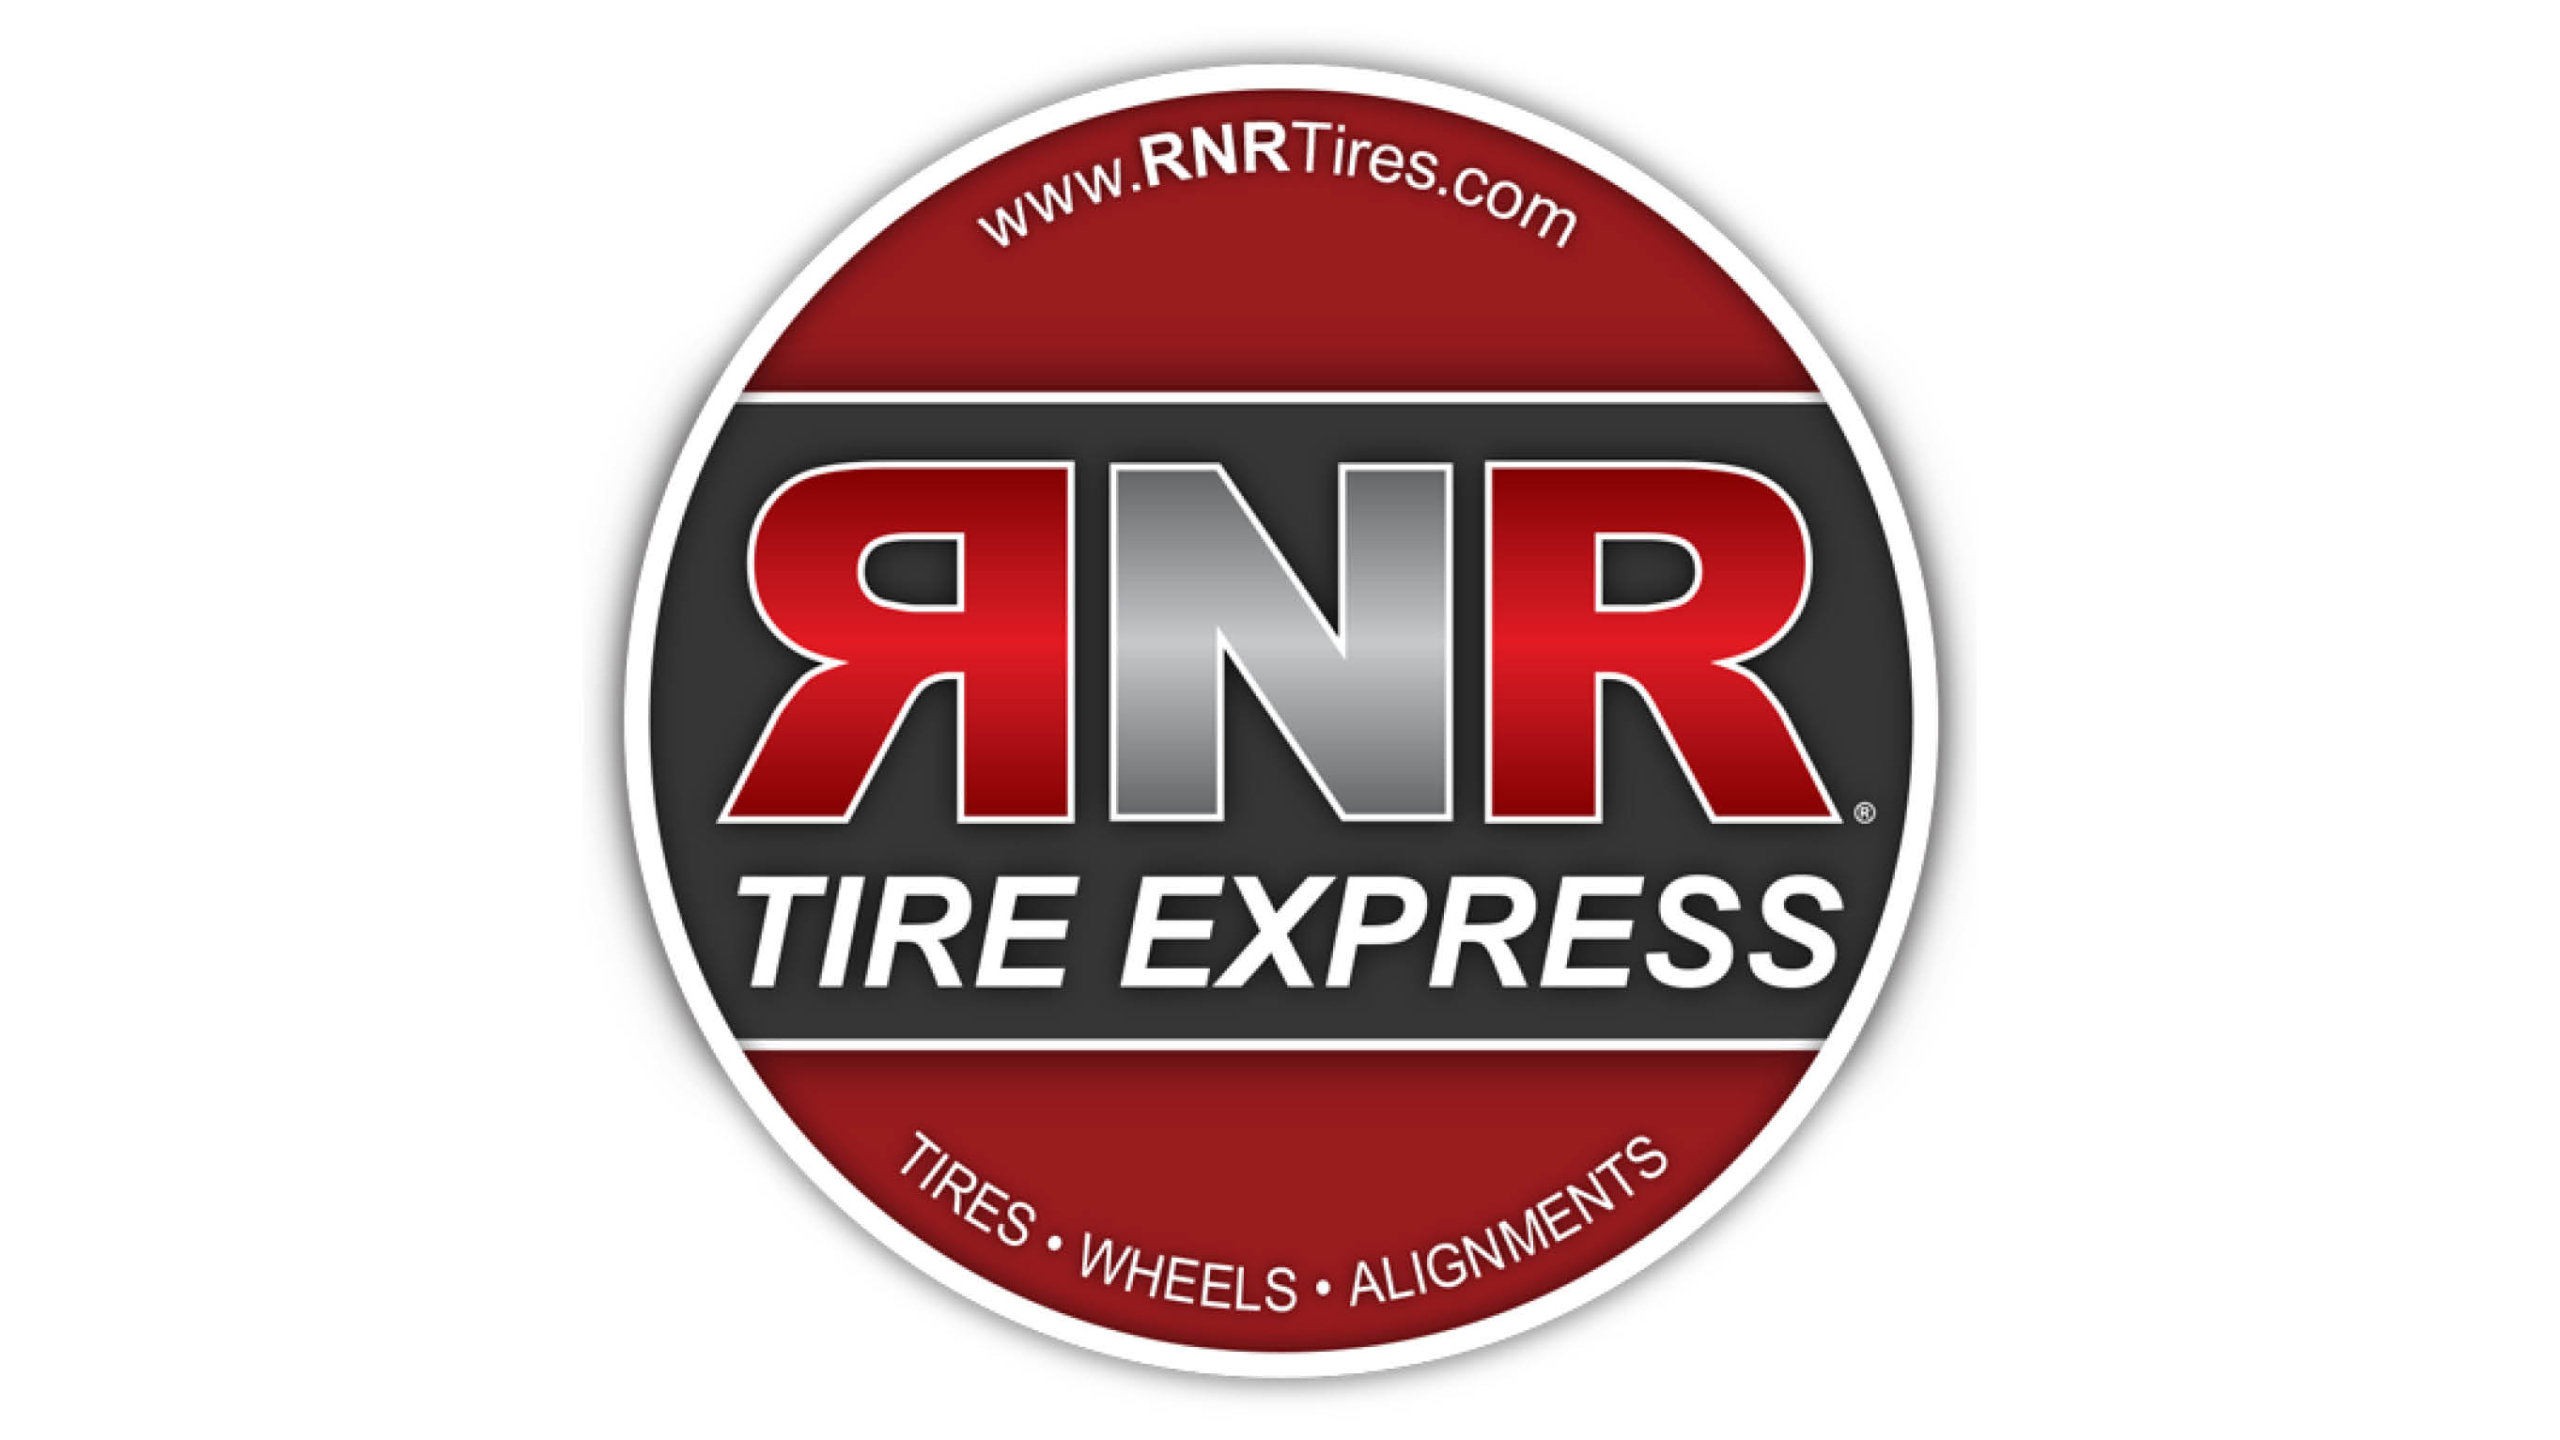 Come see us at RNR Tire Express!